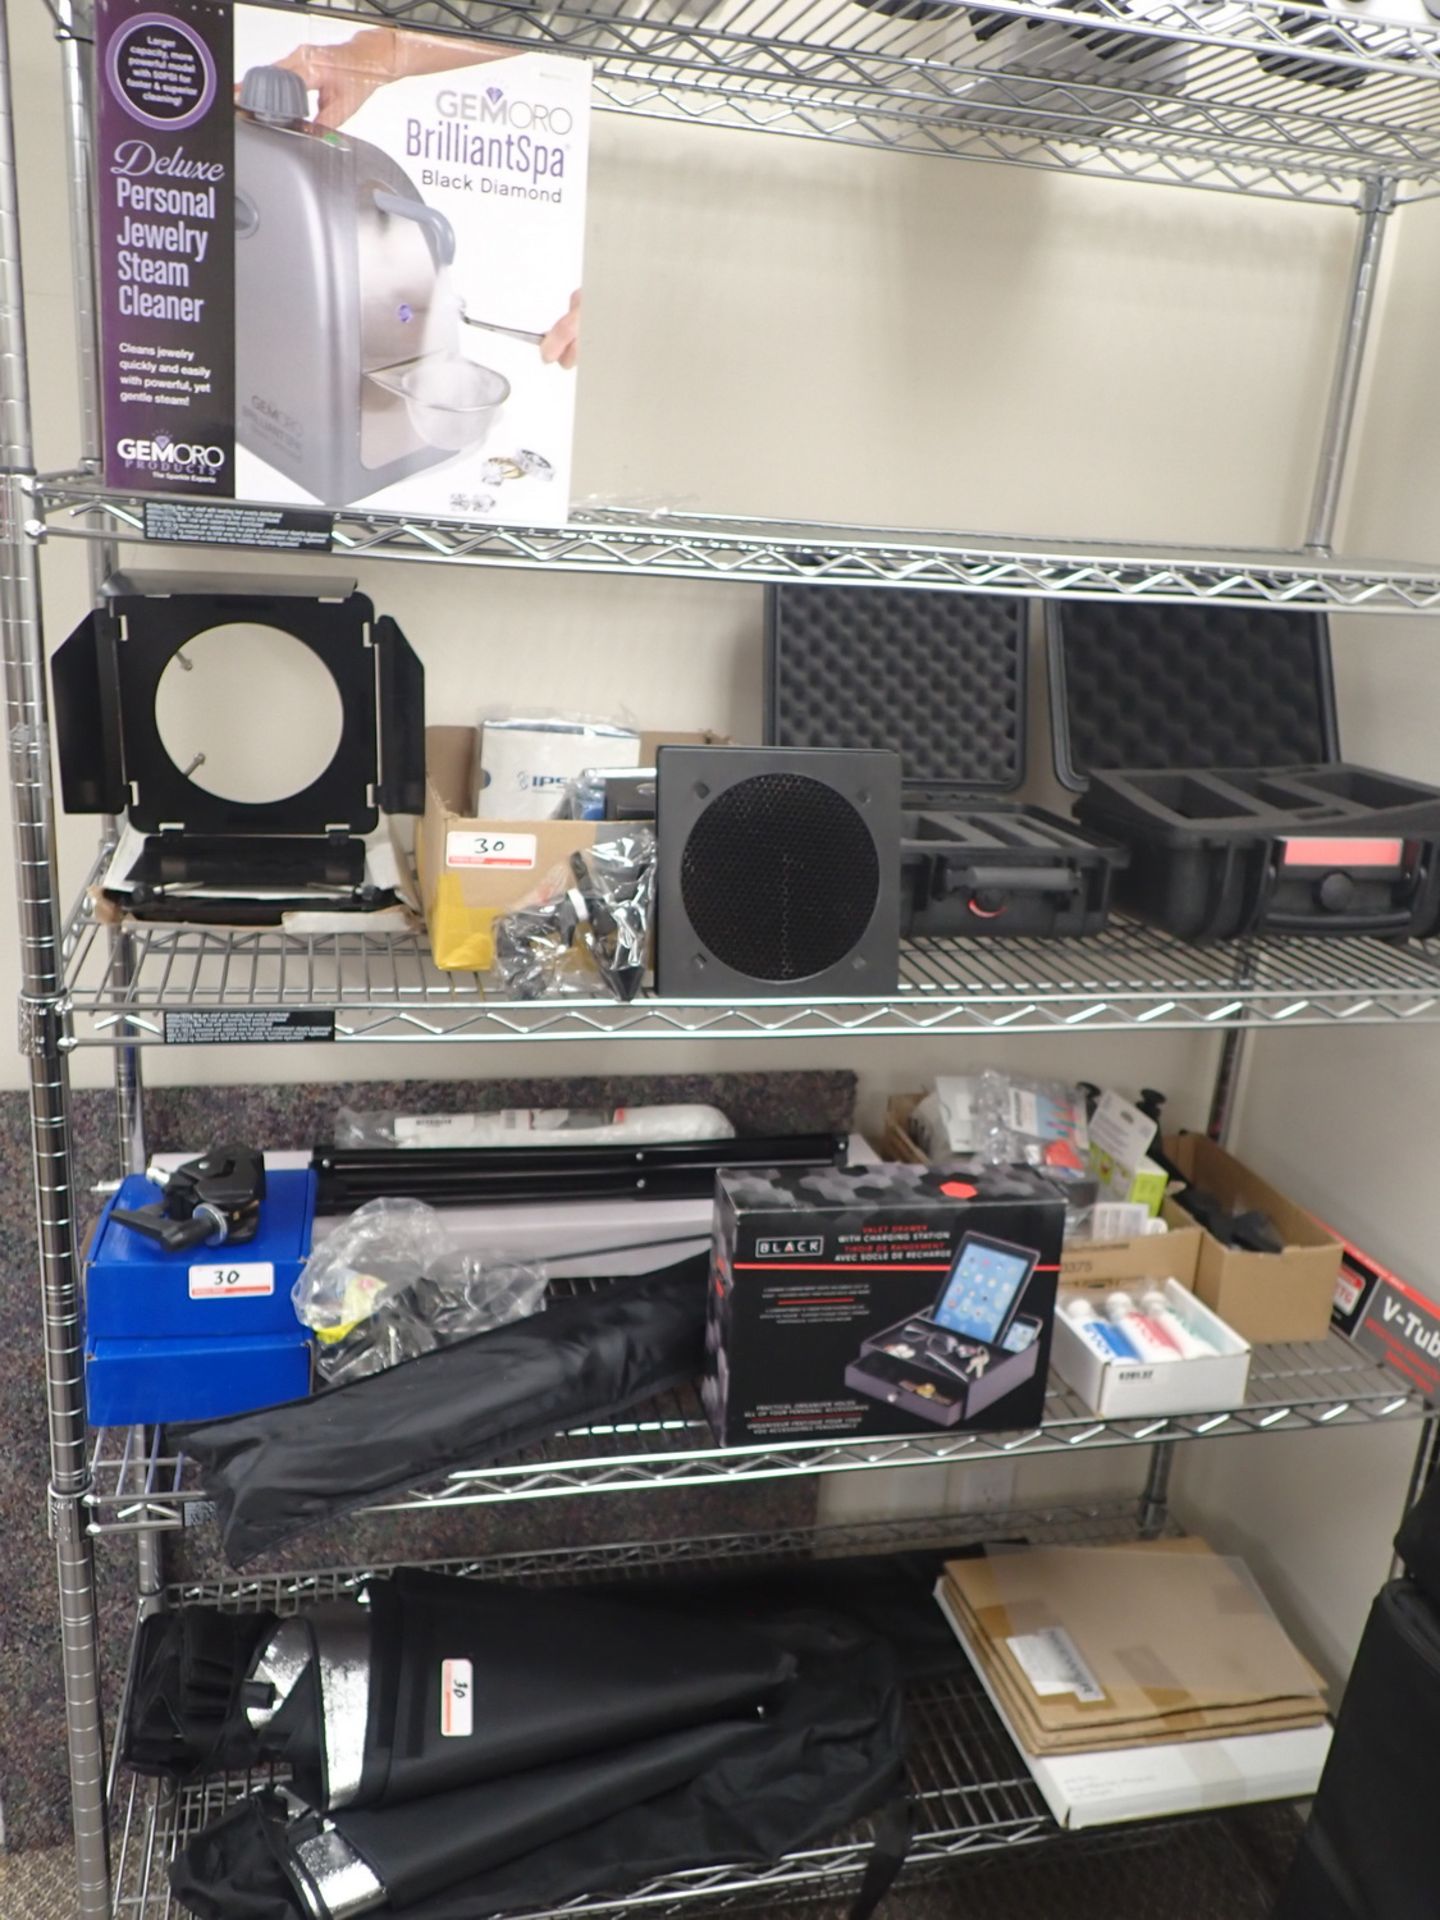 LOT - LIGHT BOXES, CLAMPS, SOFT BOXES, REFLECTORS, JEWELLRY CLEANER, & PROP CLOTHS - Image 2 of 9